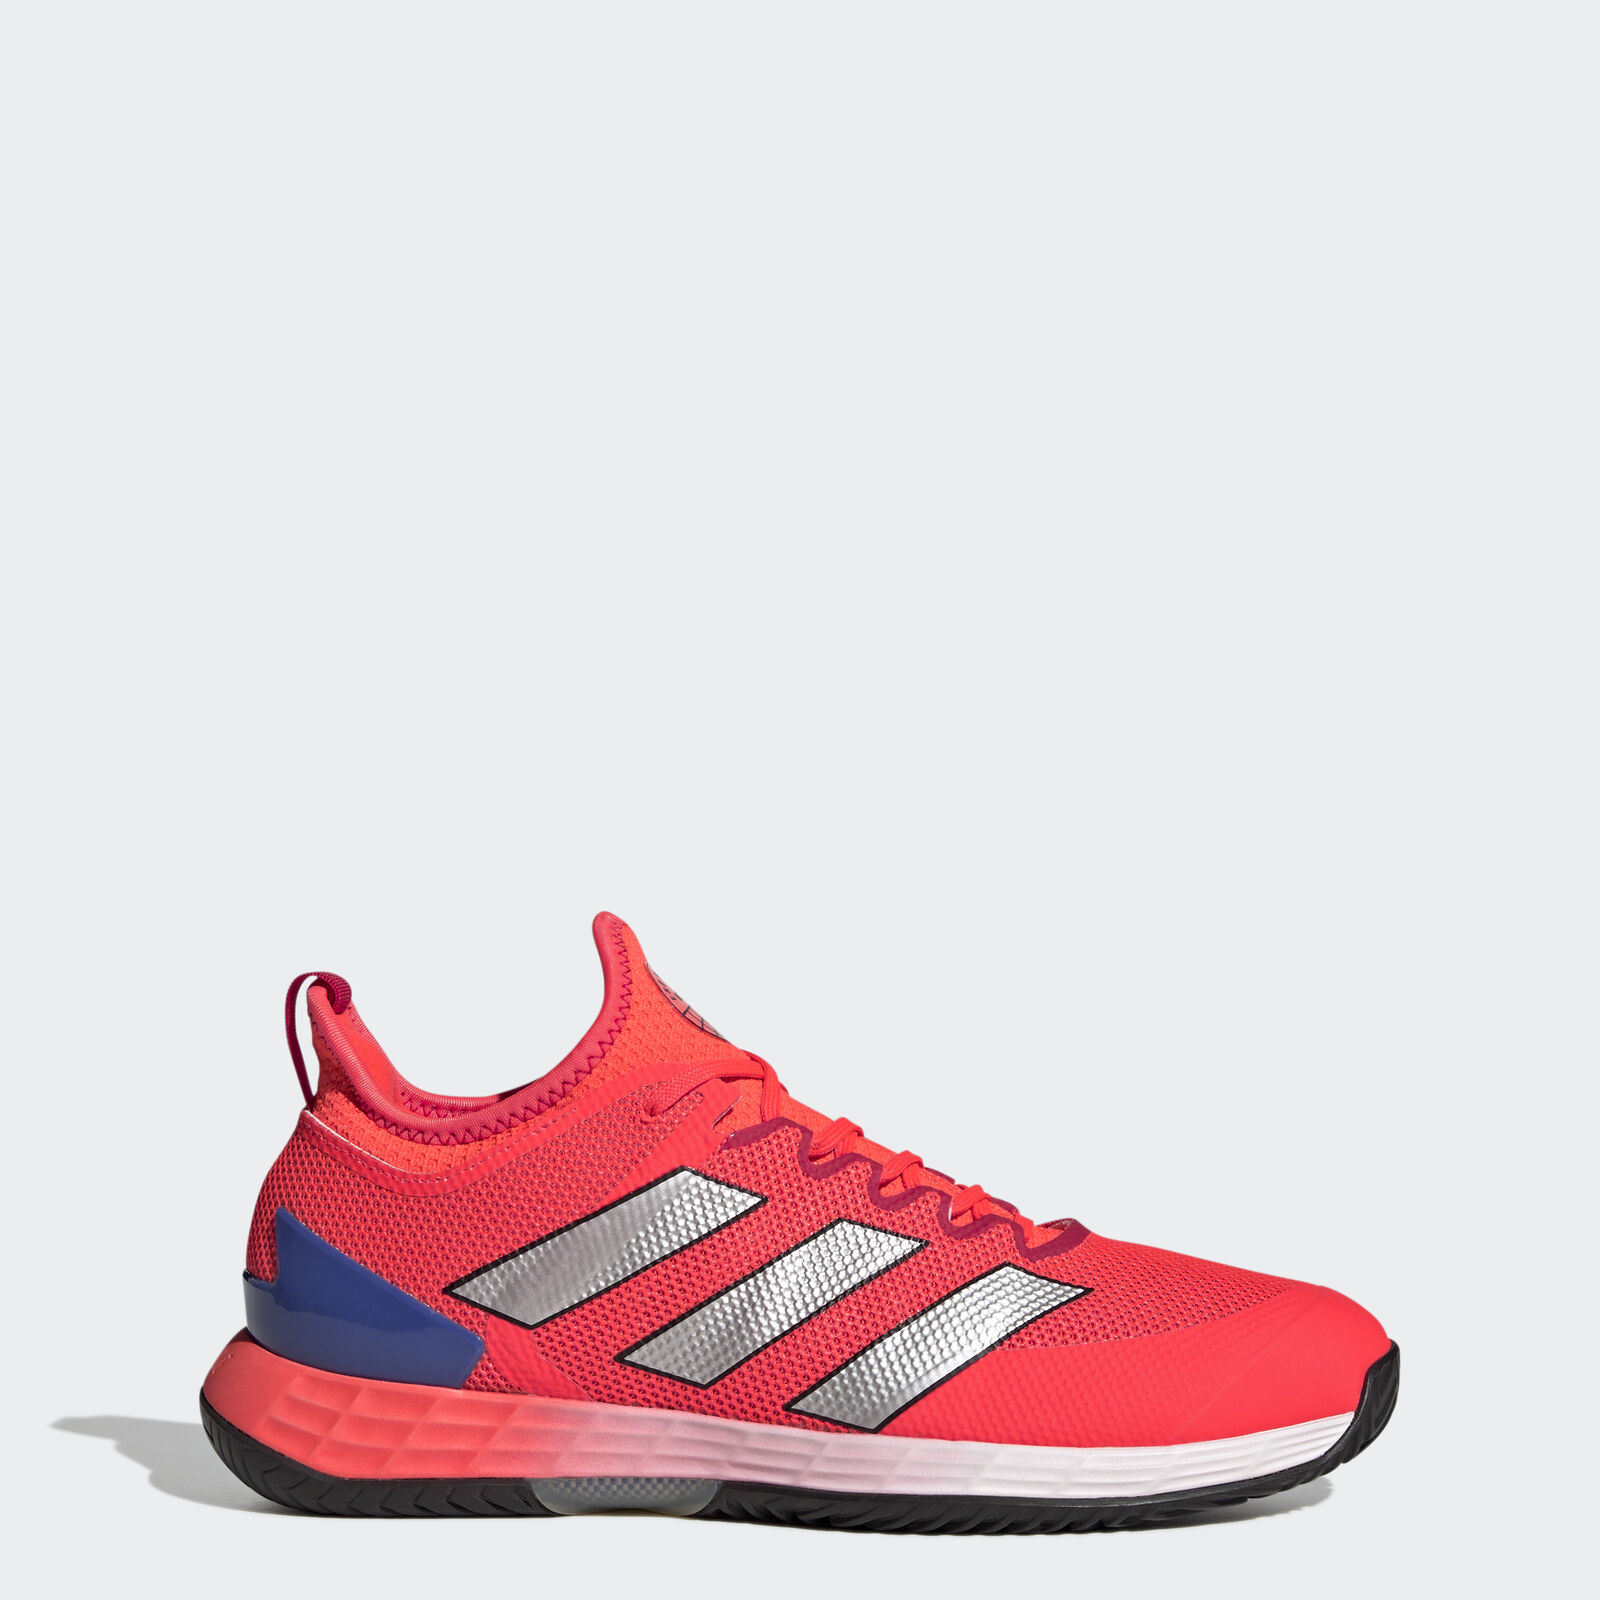 adidas Men's adizero Ubersonic 4 Tennis Shoes (Red/Silver/Blue, Select Sizes) $35.35 + Free Shipping